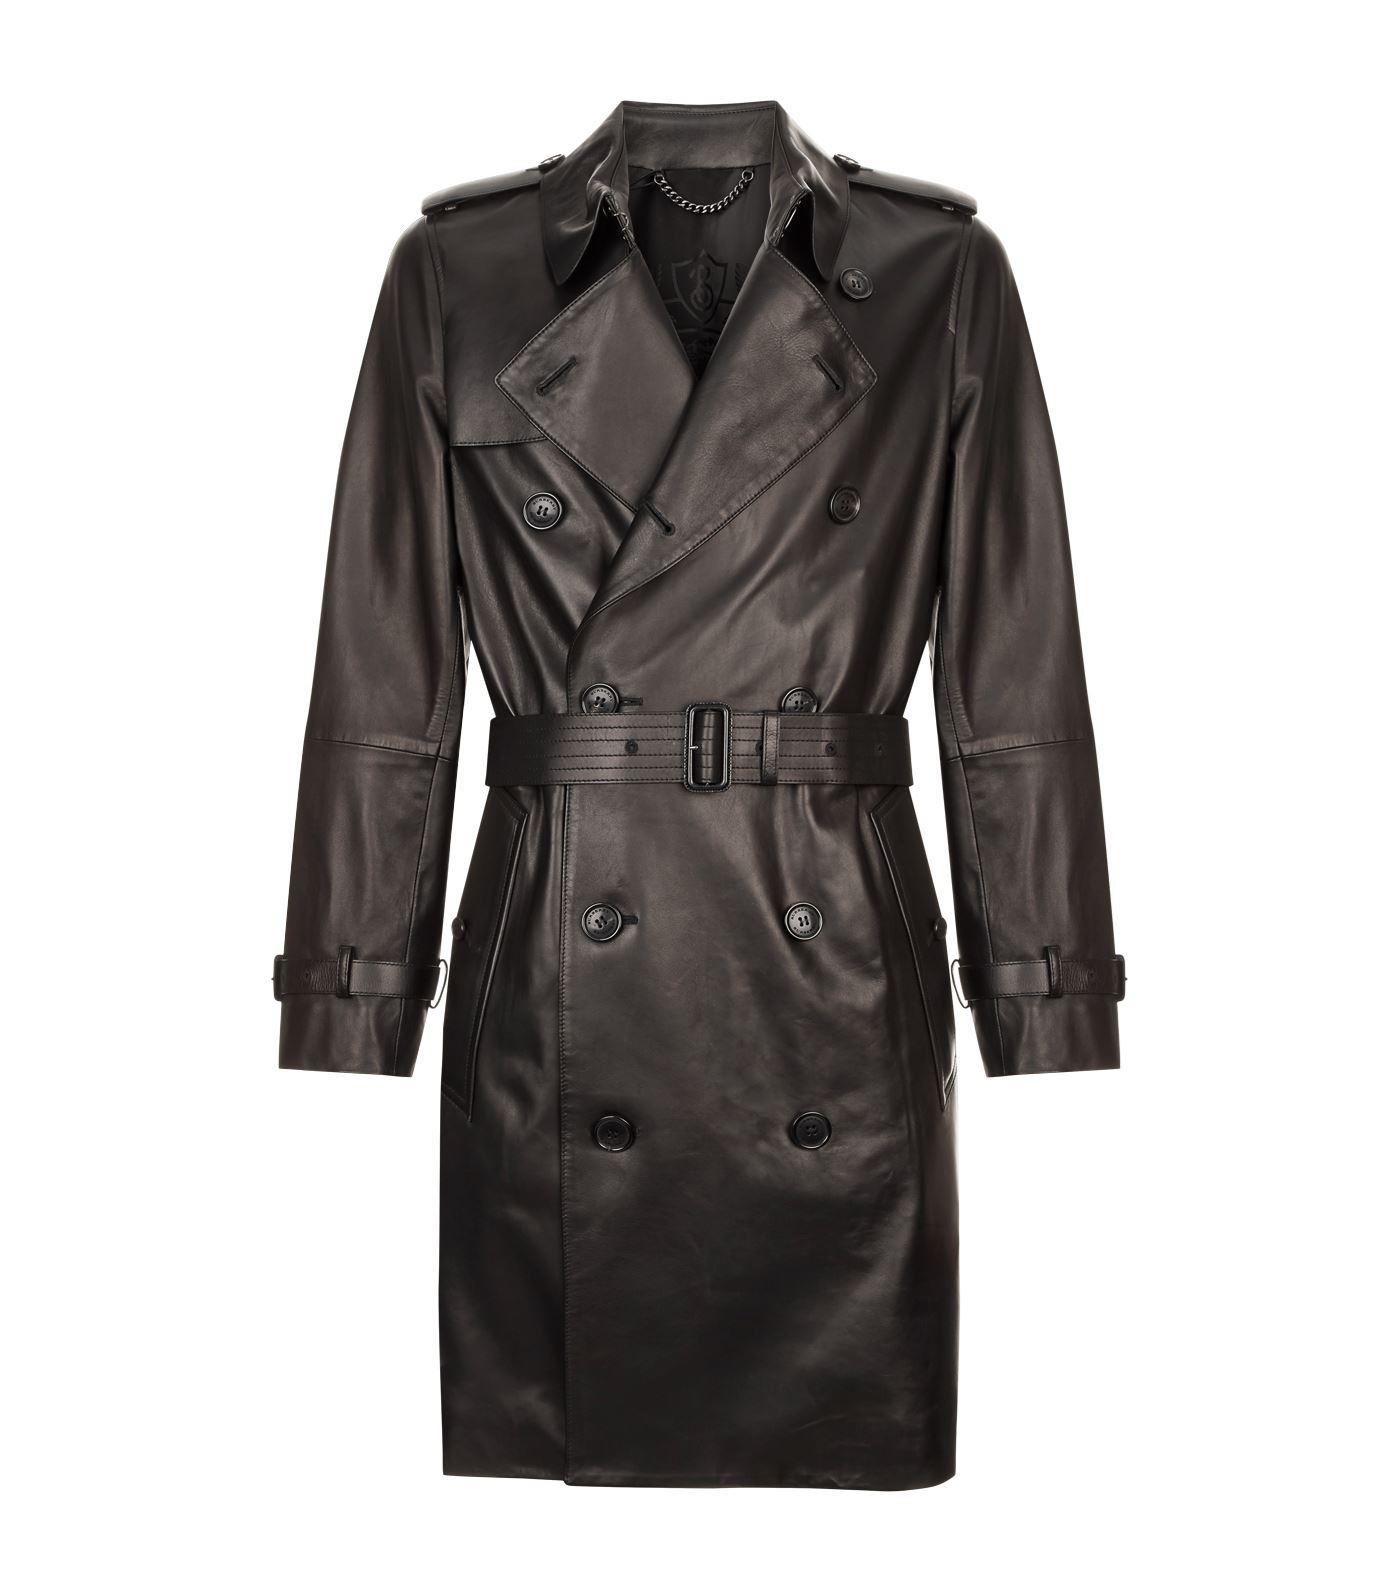 Lyst - Burberry Leather Trench Coat in Black for Men